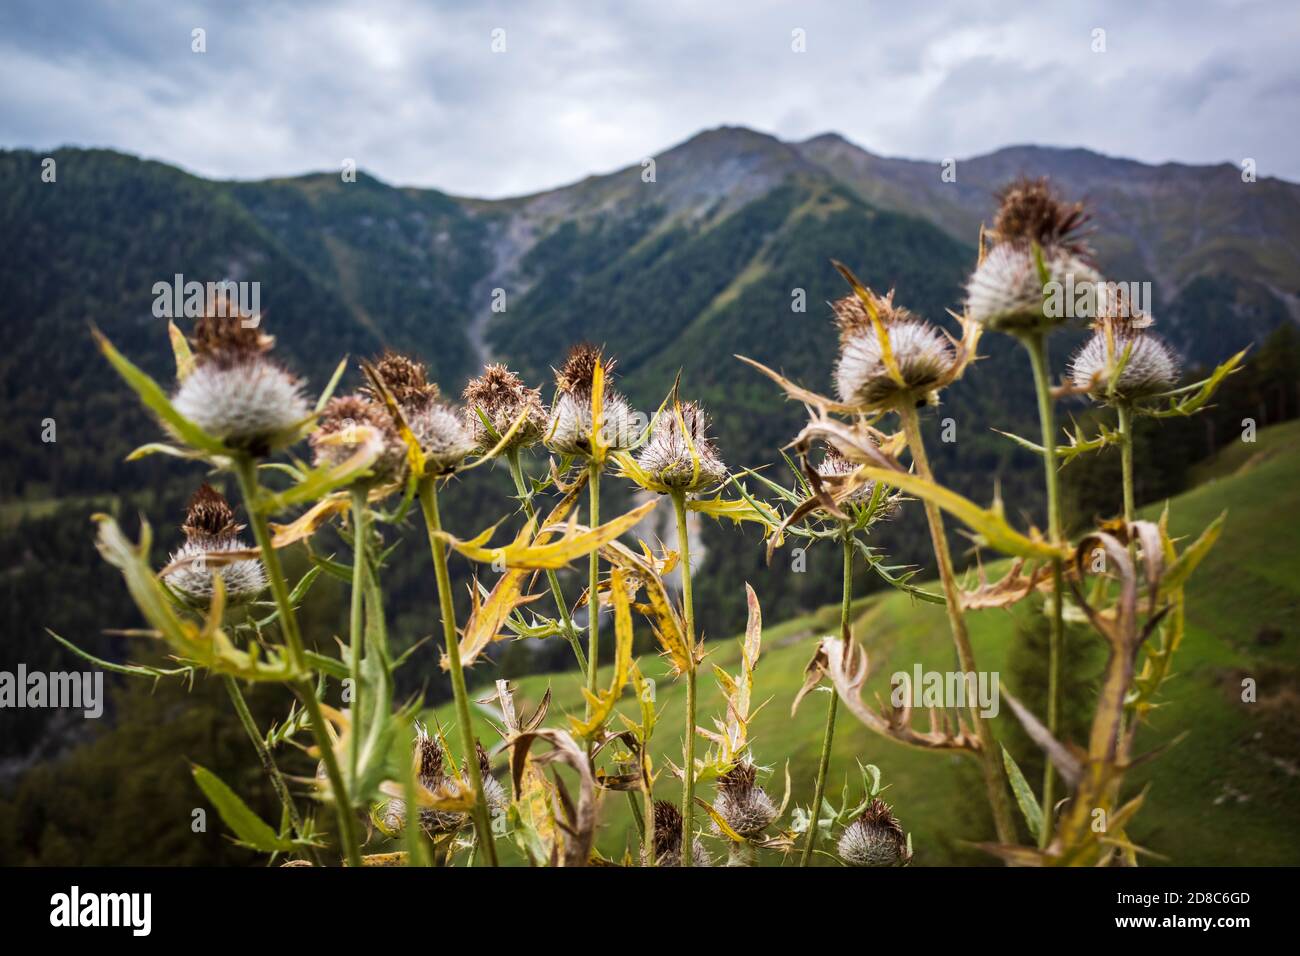 thistle by the wayside, mountain flowers, alpine herbs Stock Photo